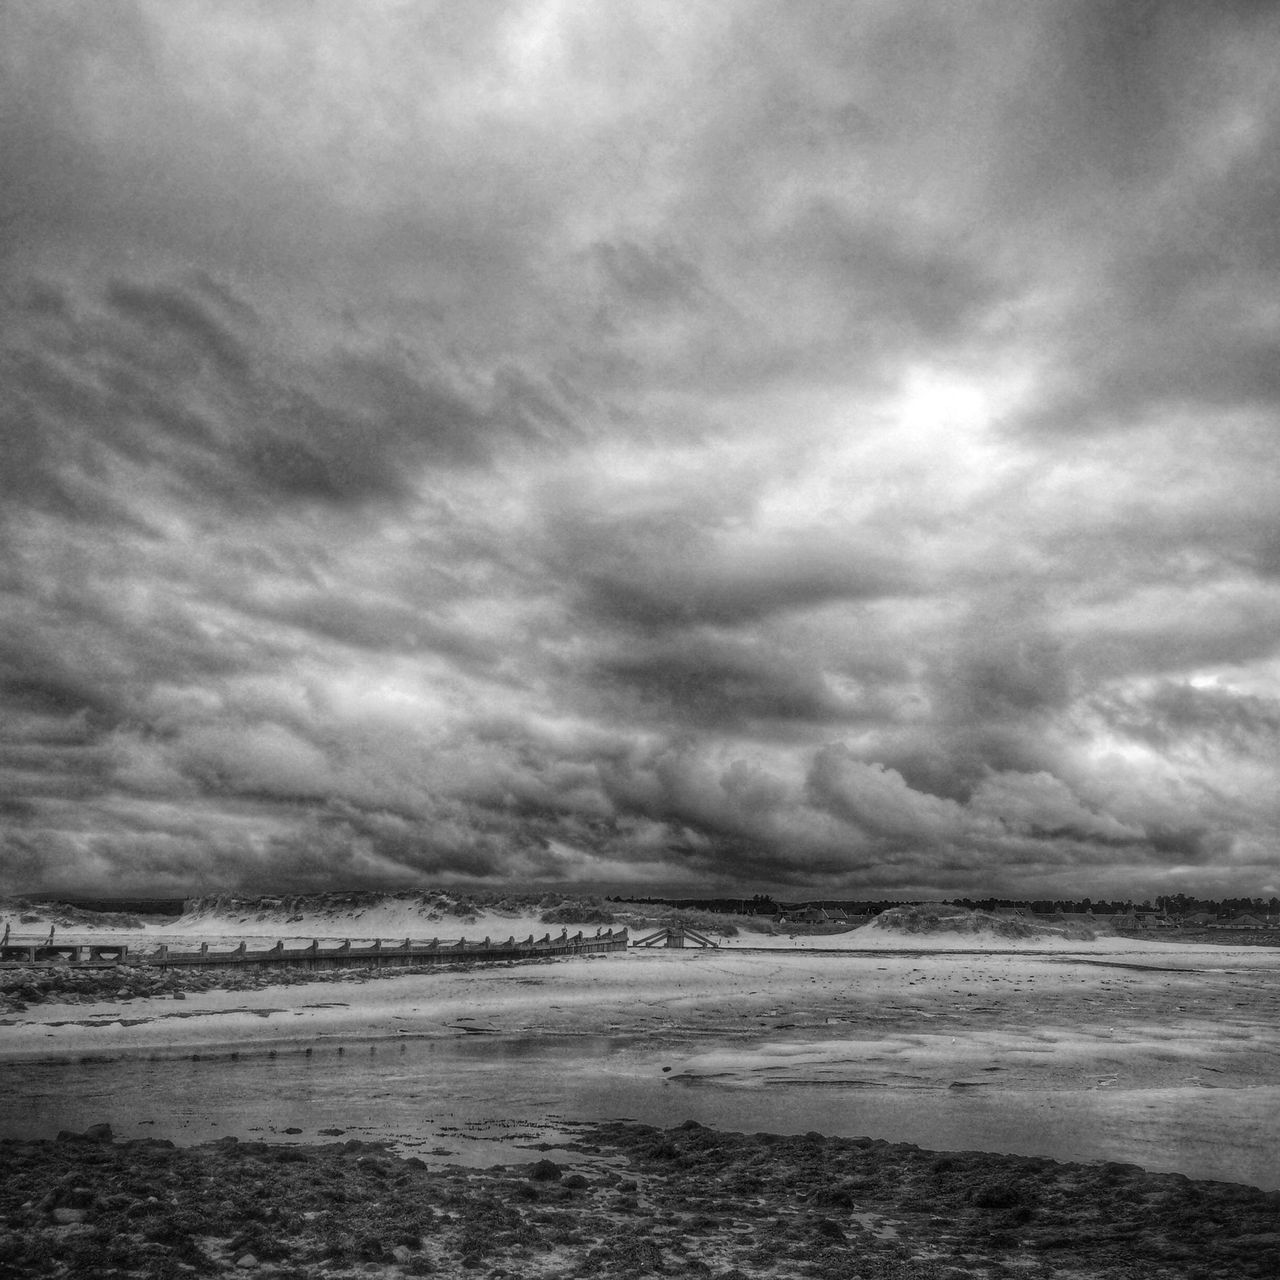 sky, weather, cloudy, cloud - sky, tranquility, tranquil scene, scenics, overcast, beauty in nature, nature, storm cloud, landscape, winter, water, cold temperature, beach, cloud, sea, snow, season